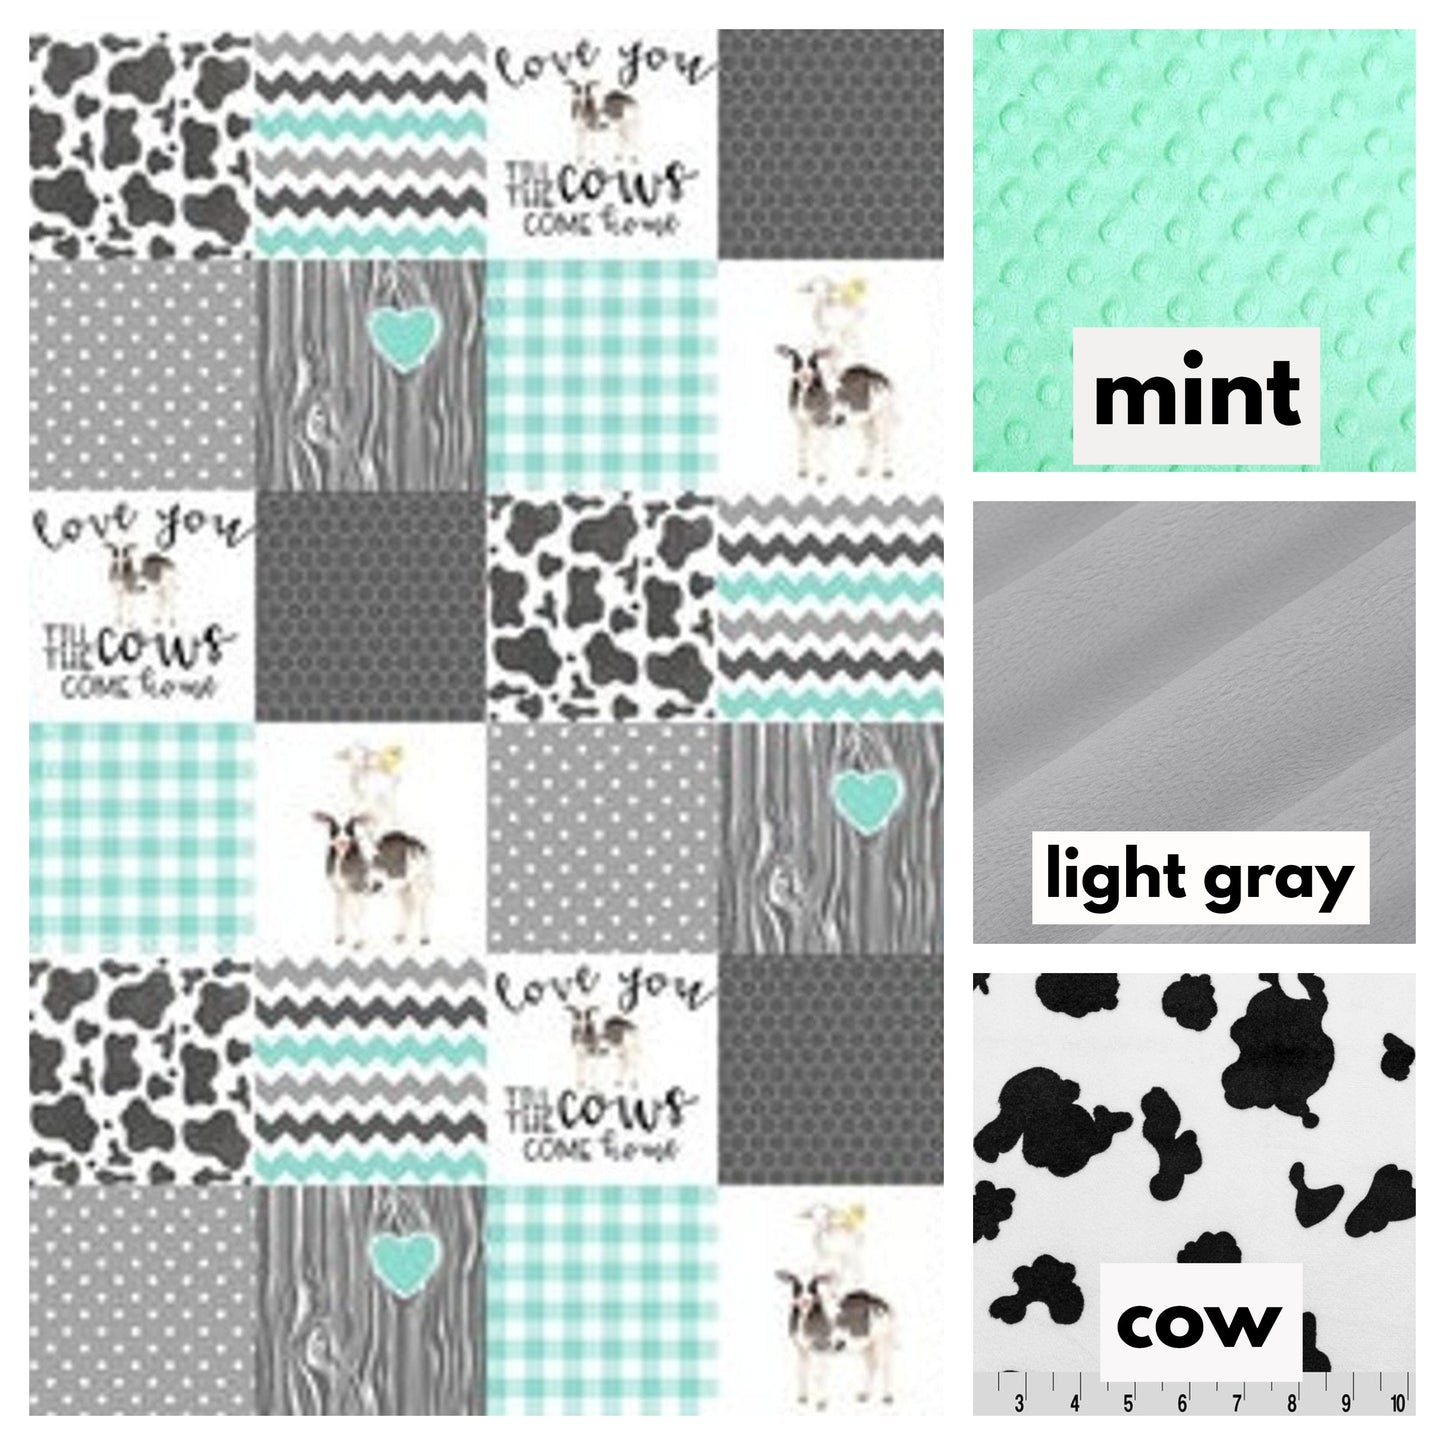 minky colors available - mint, light gray & cow